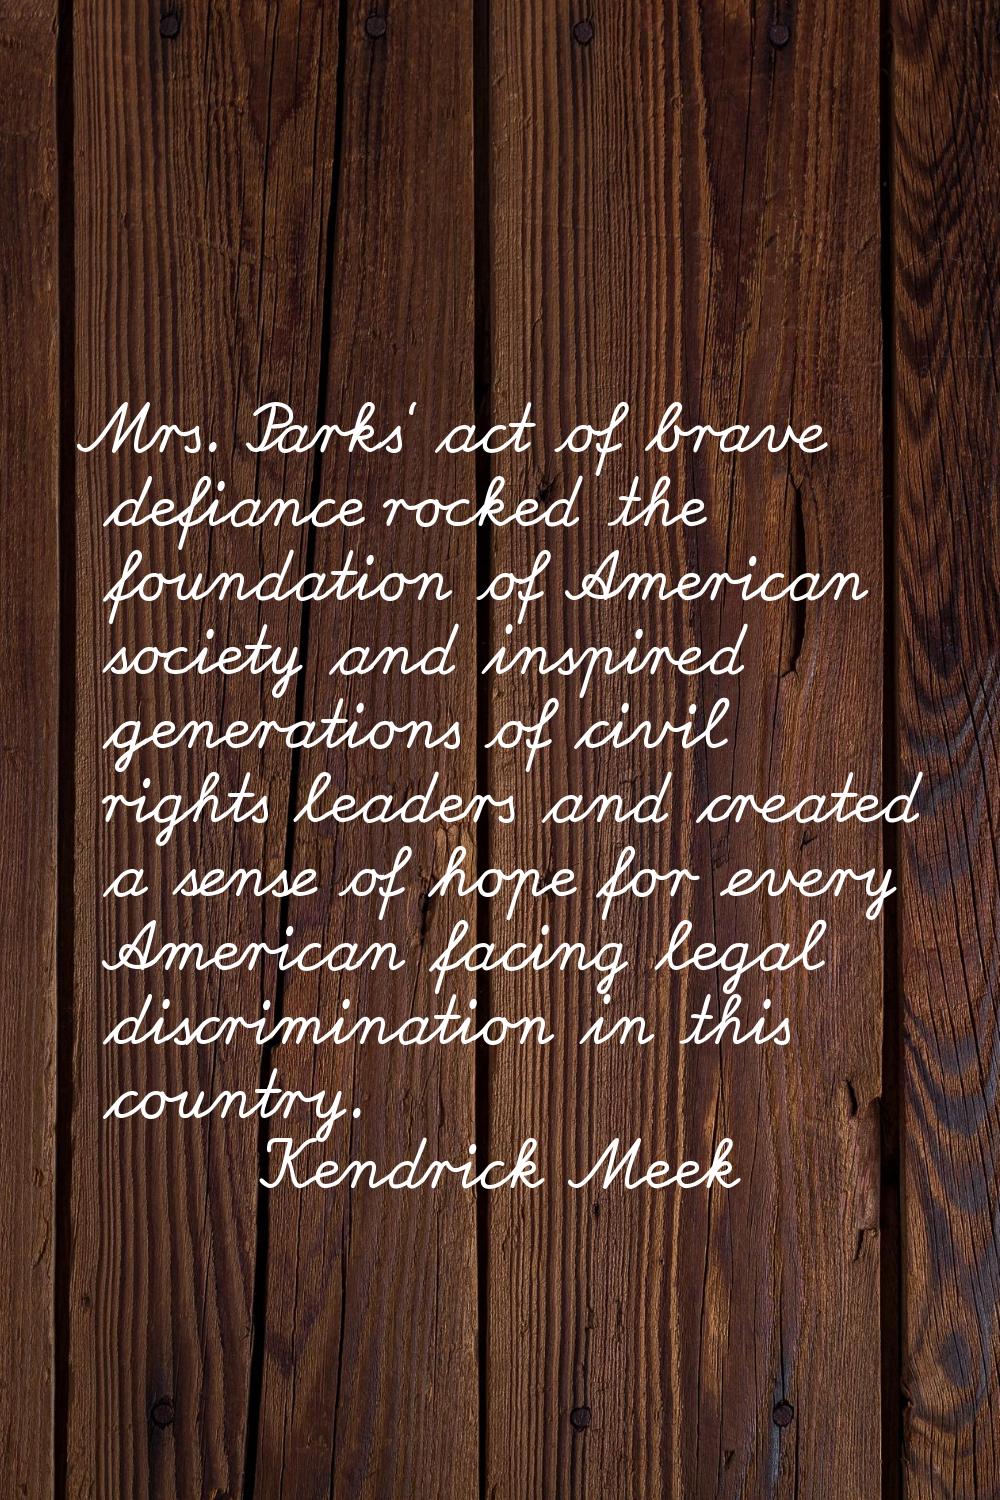 Mrs. Parks' act of brave defiance rocked the foundation of American society and inspired generation